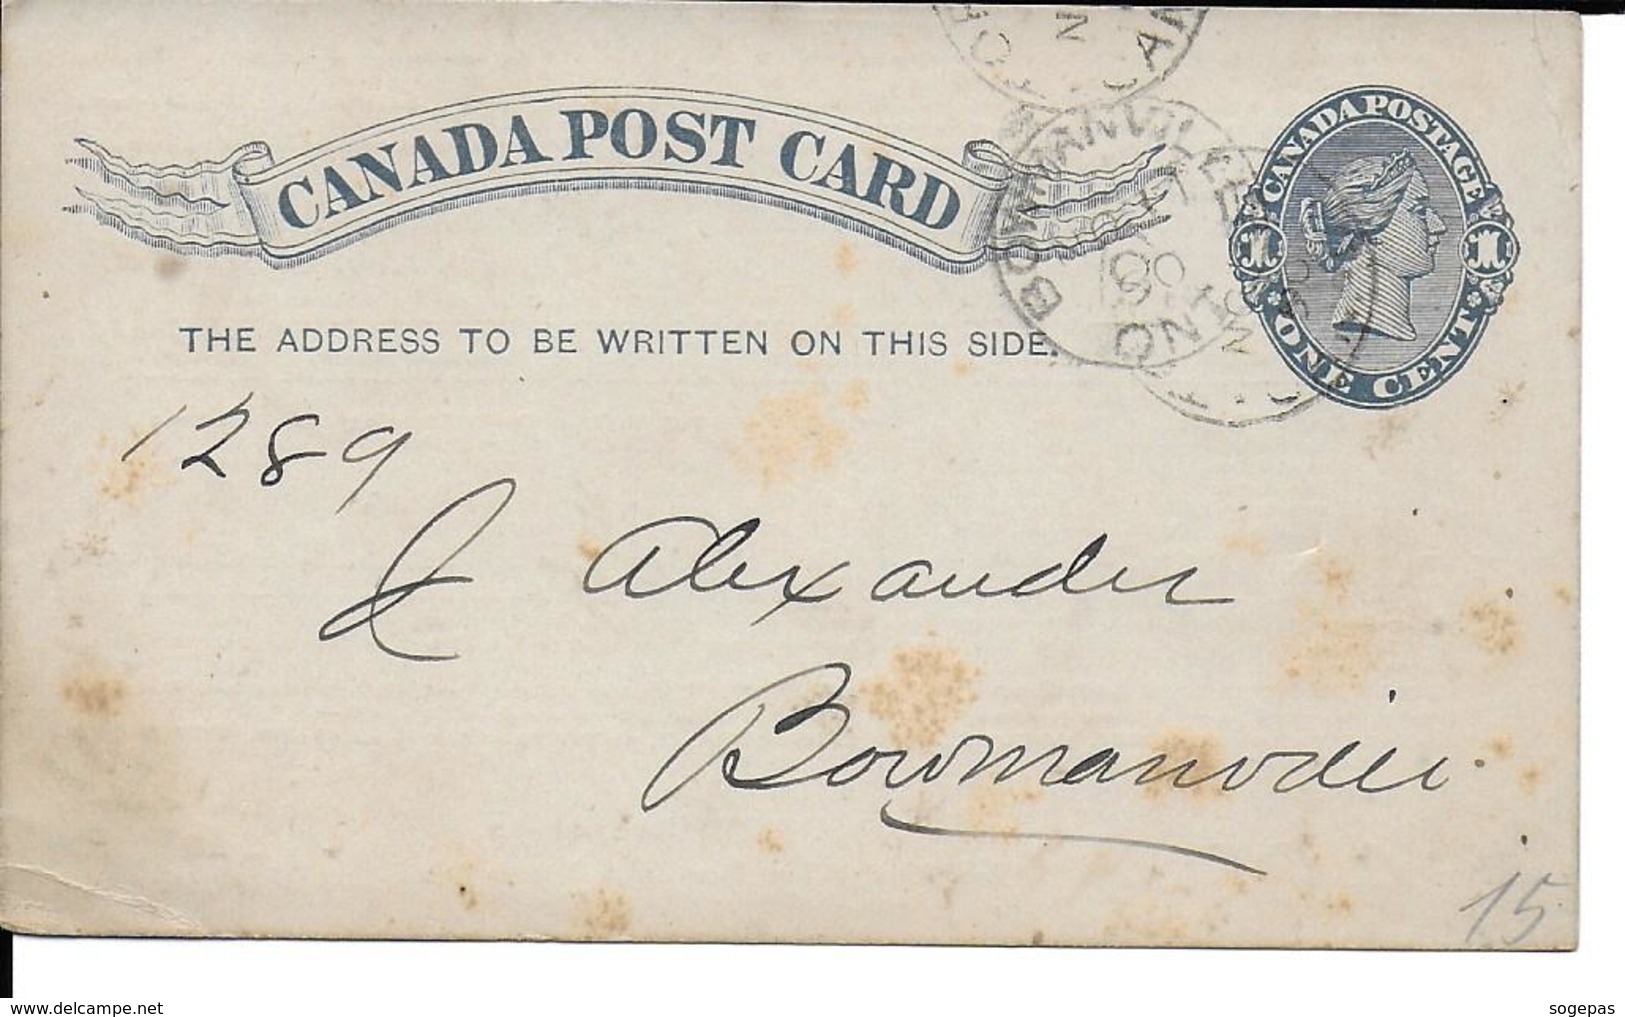 CANADA POST CARD ONE CENT - 1860-1899 Reign Of Victoria